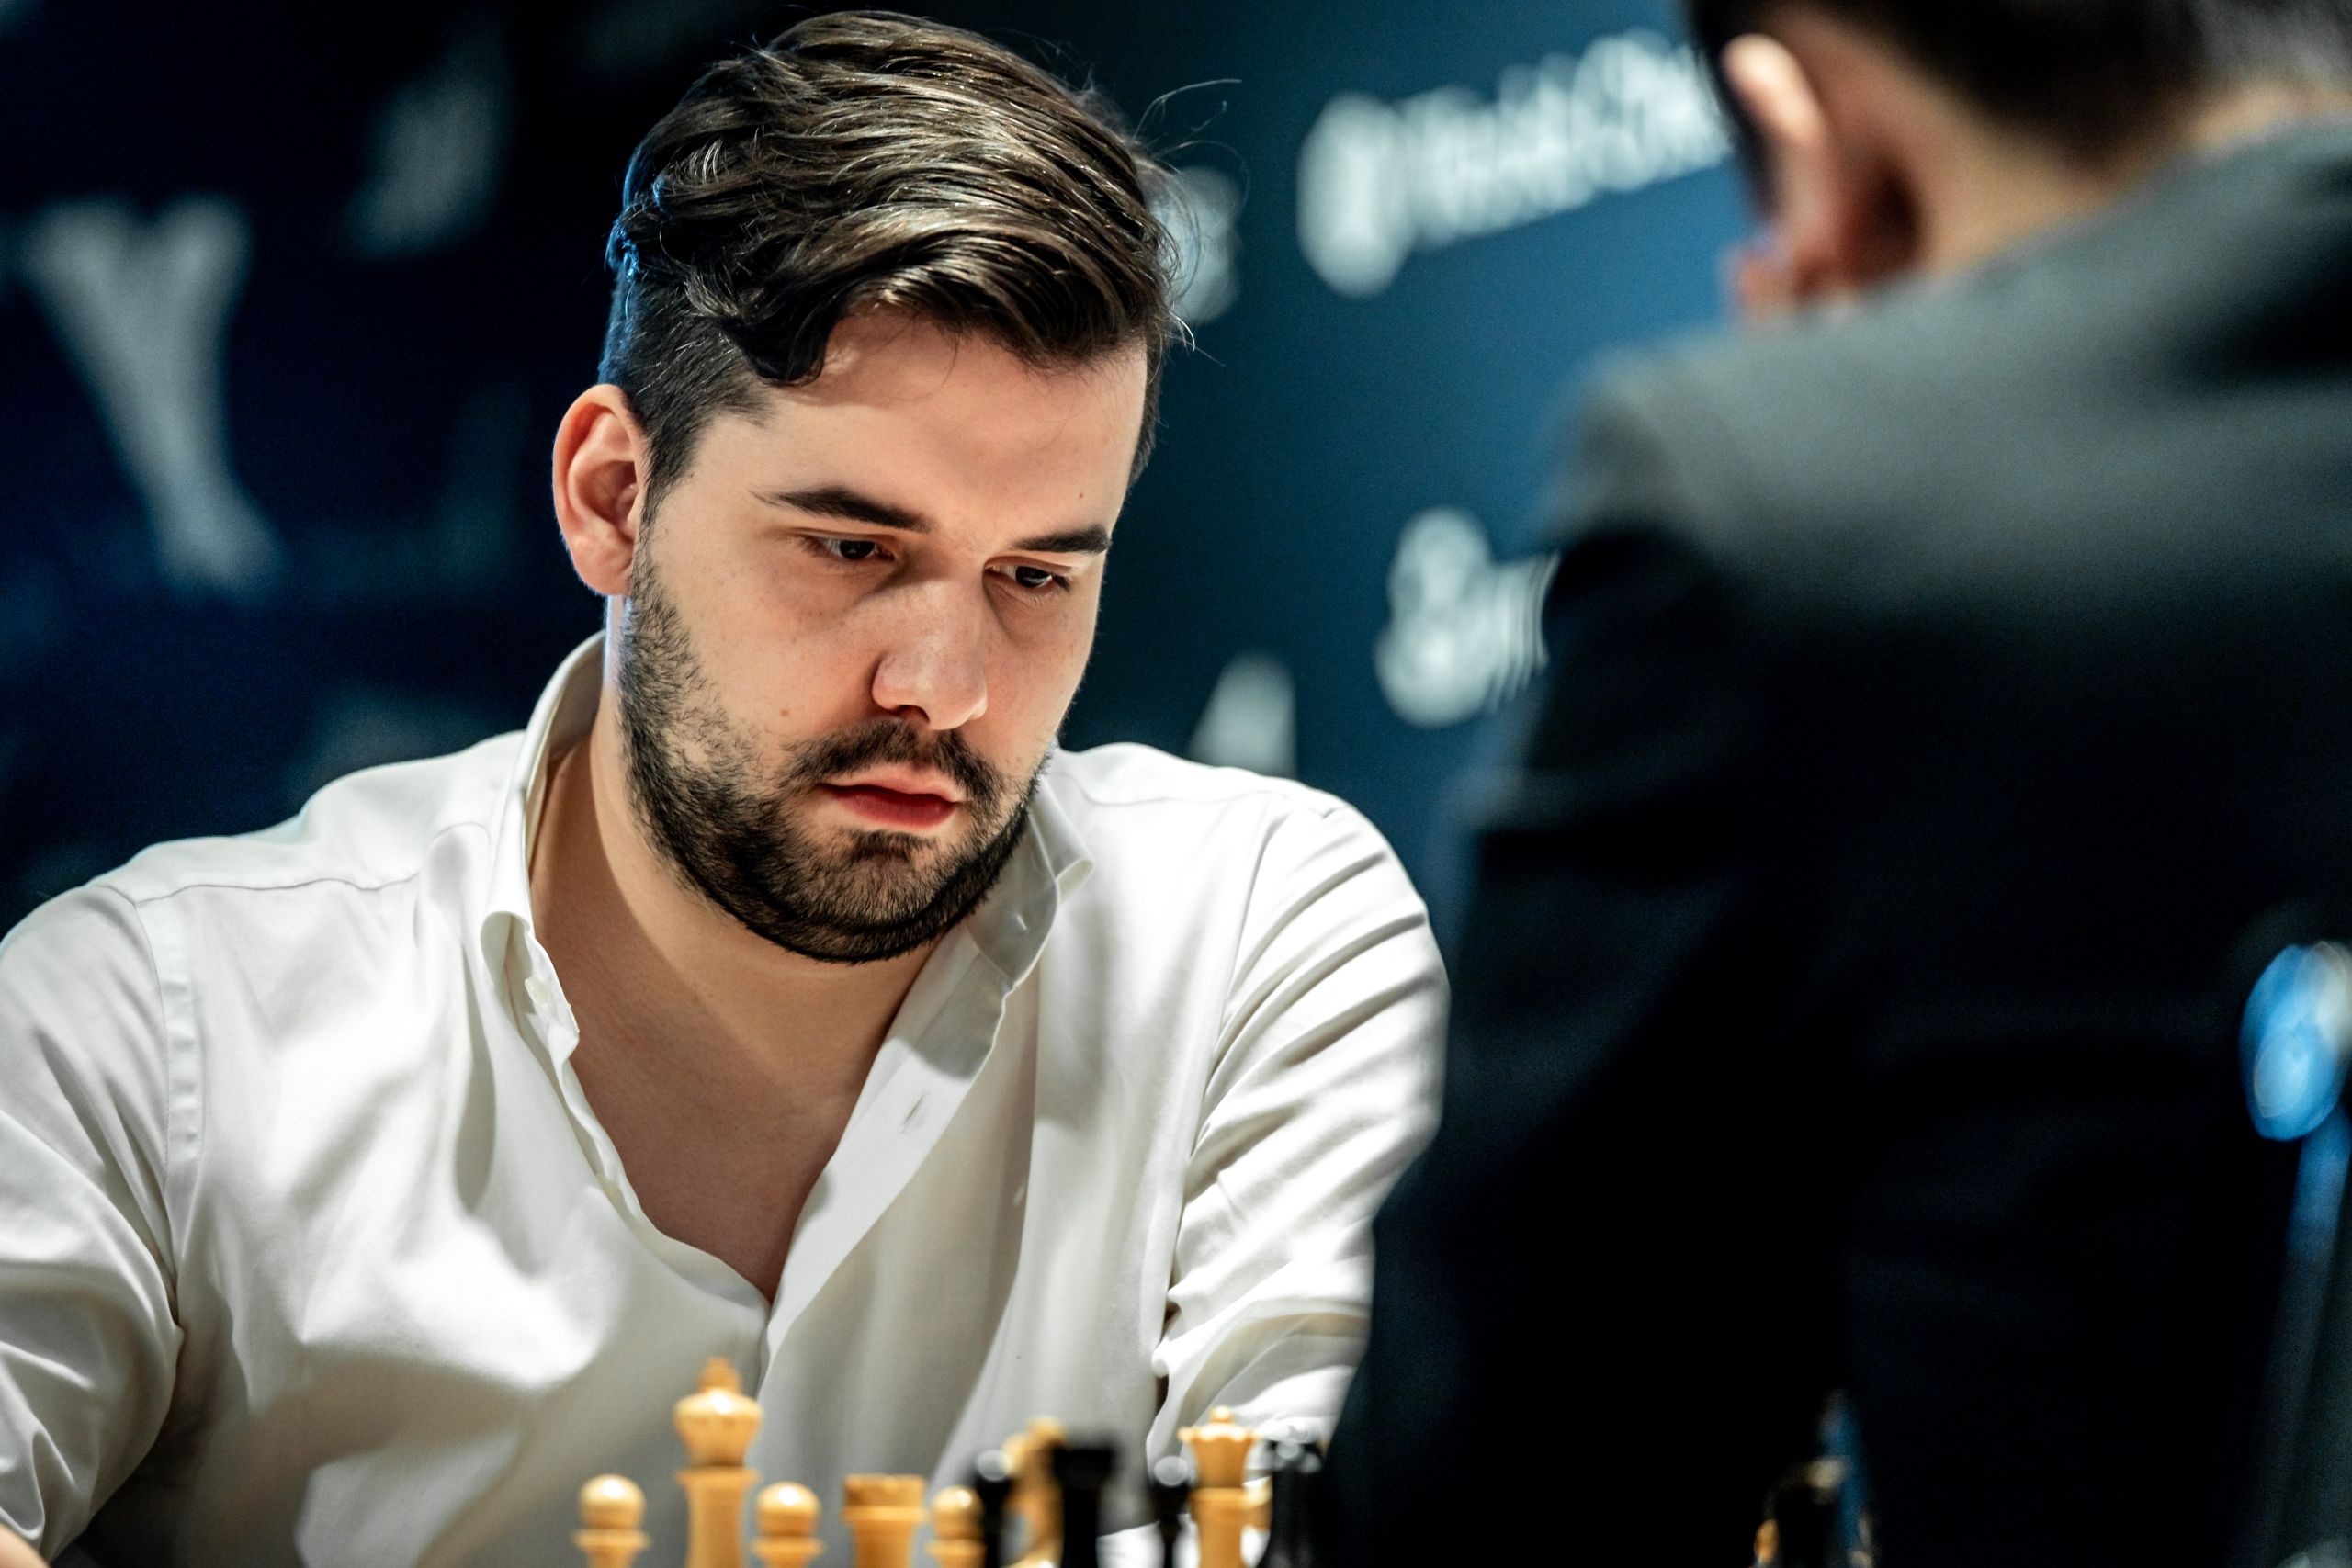 Ian Nepomniachtchi is our next challenger! – ChessHive